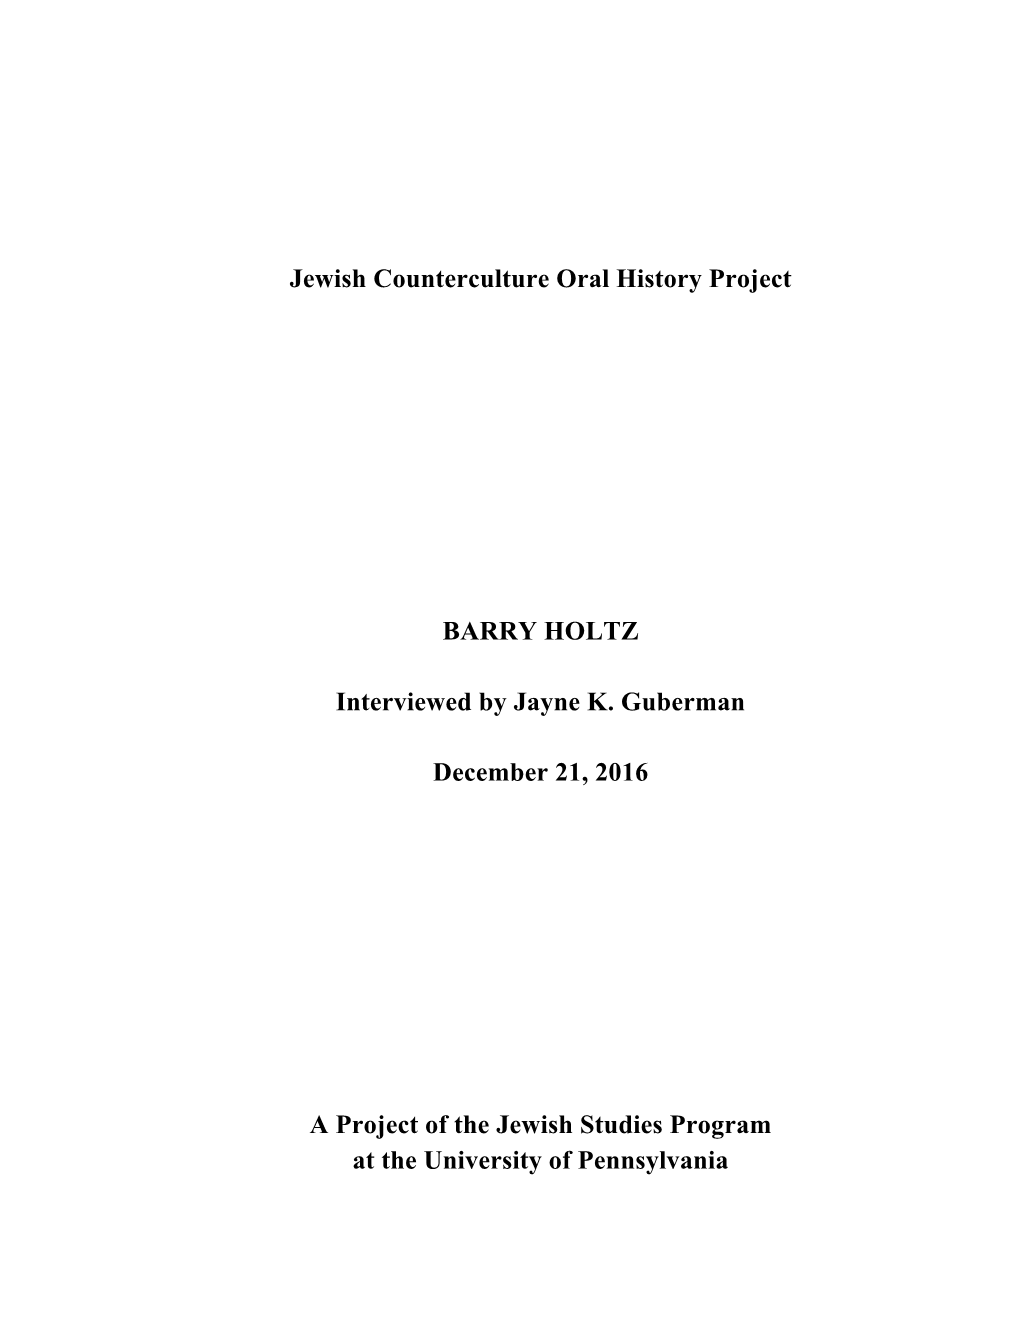 Jewish Counterculture Oral History Project BARRY HOLTZ Interviewed by Jayne K. Guberman December 21, 2016 a Project of the Jewis